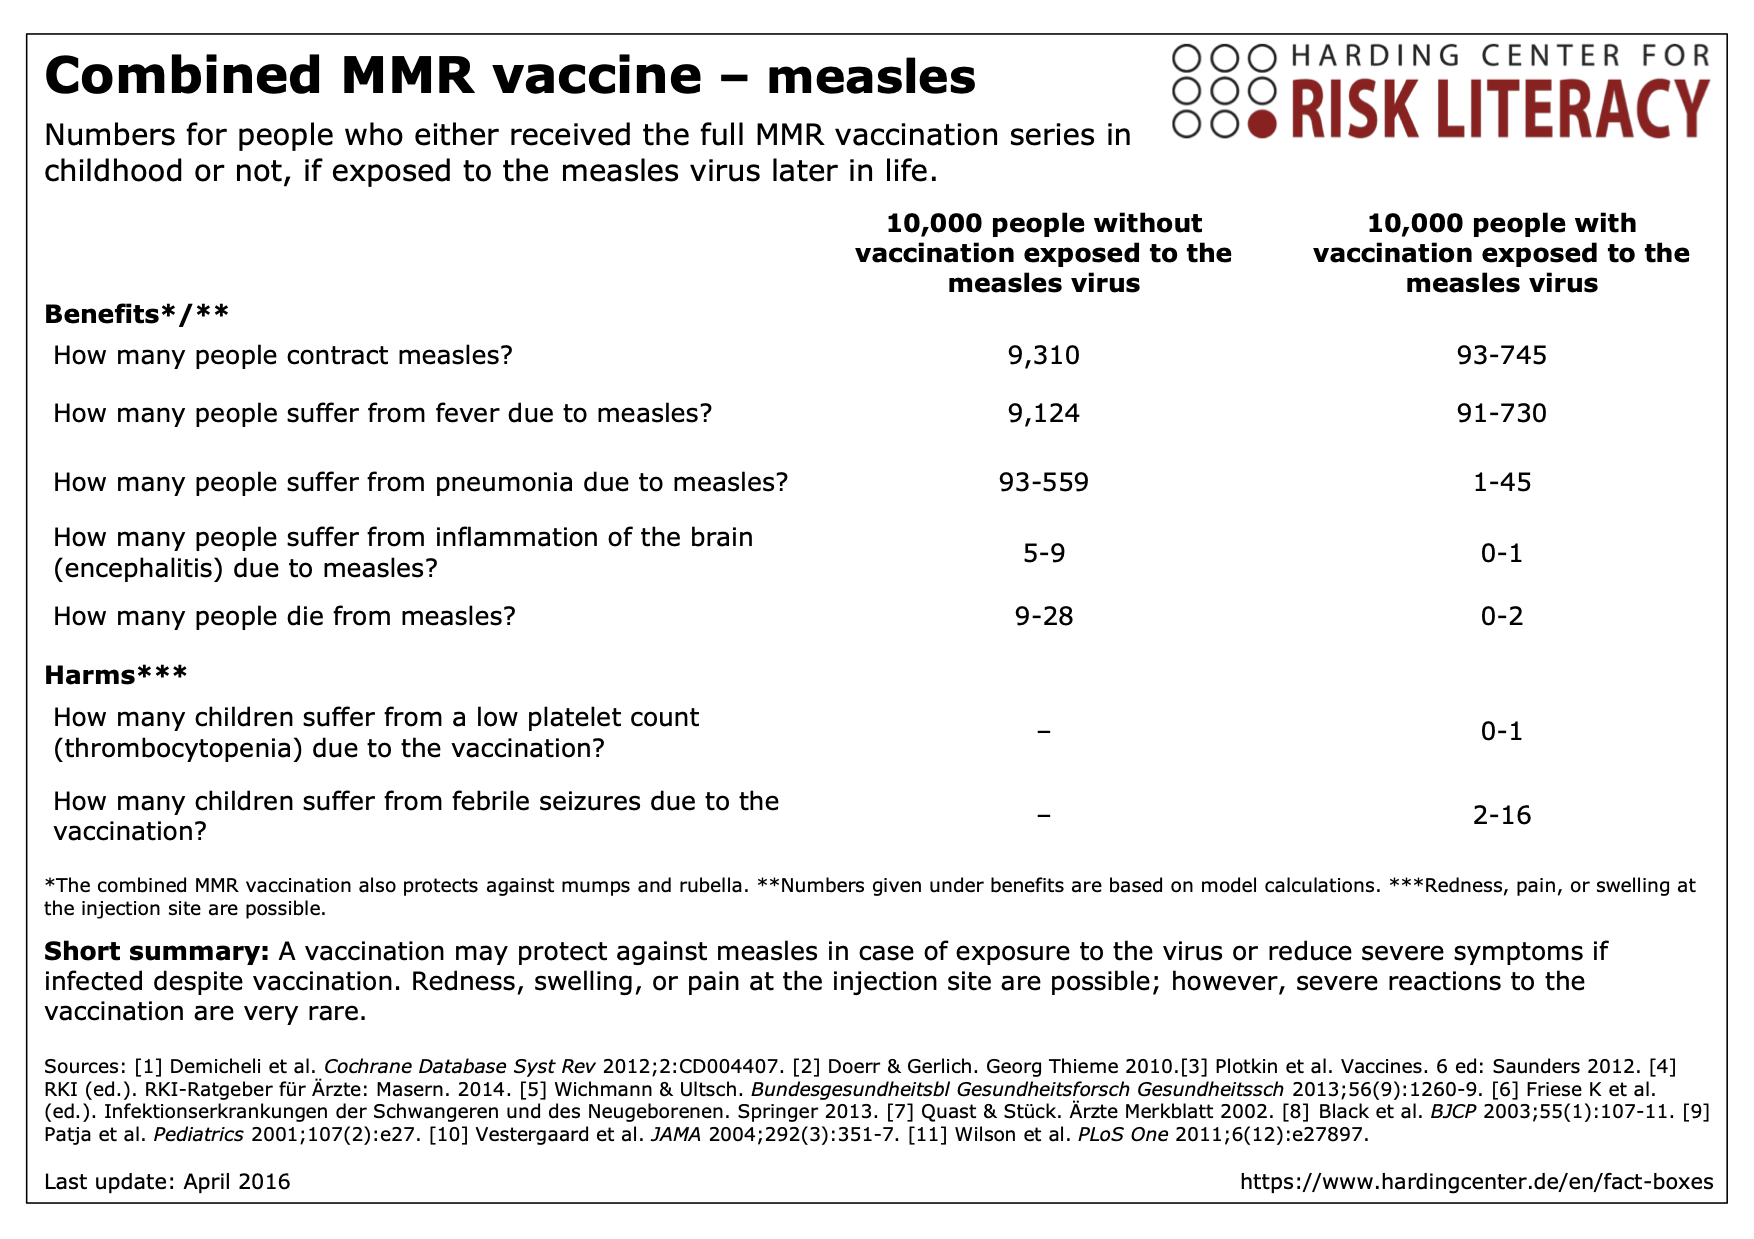 Fact box combined MMR vaccine in childhood – measles